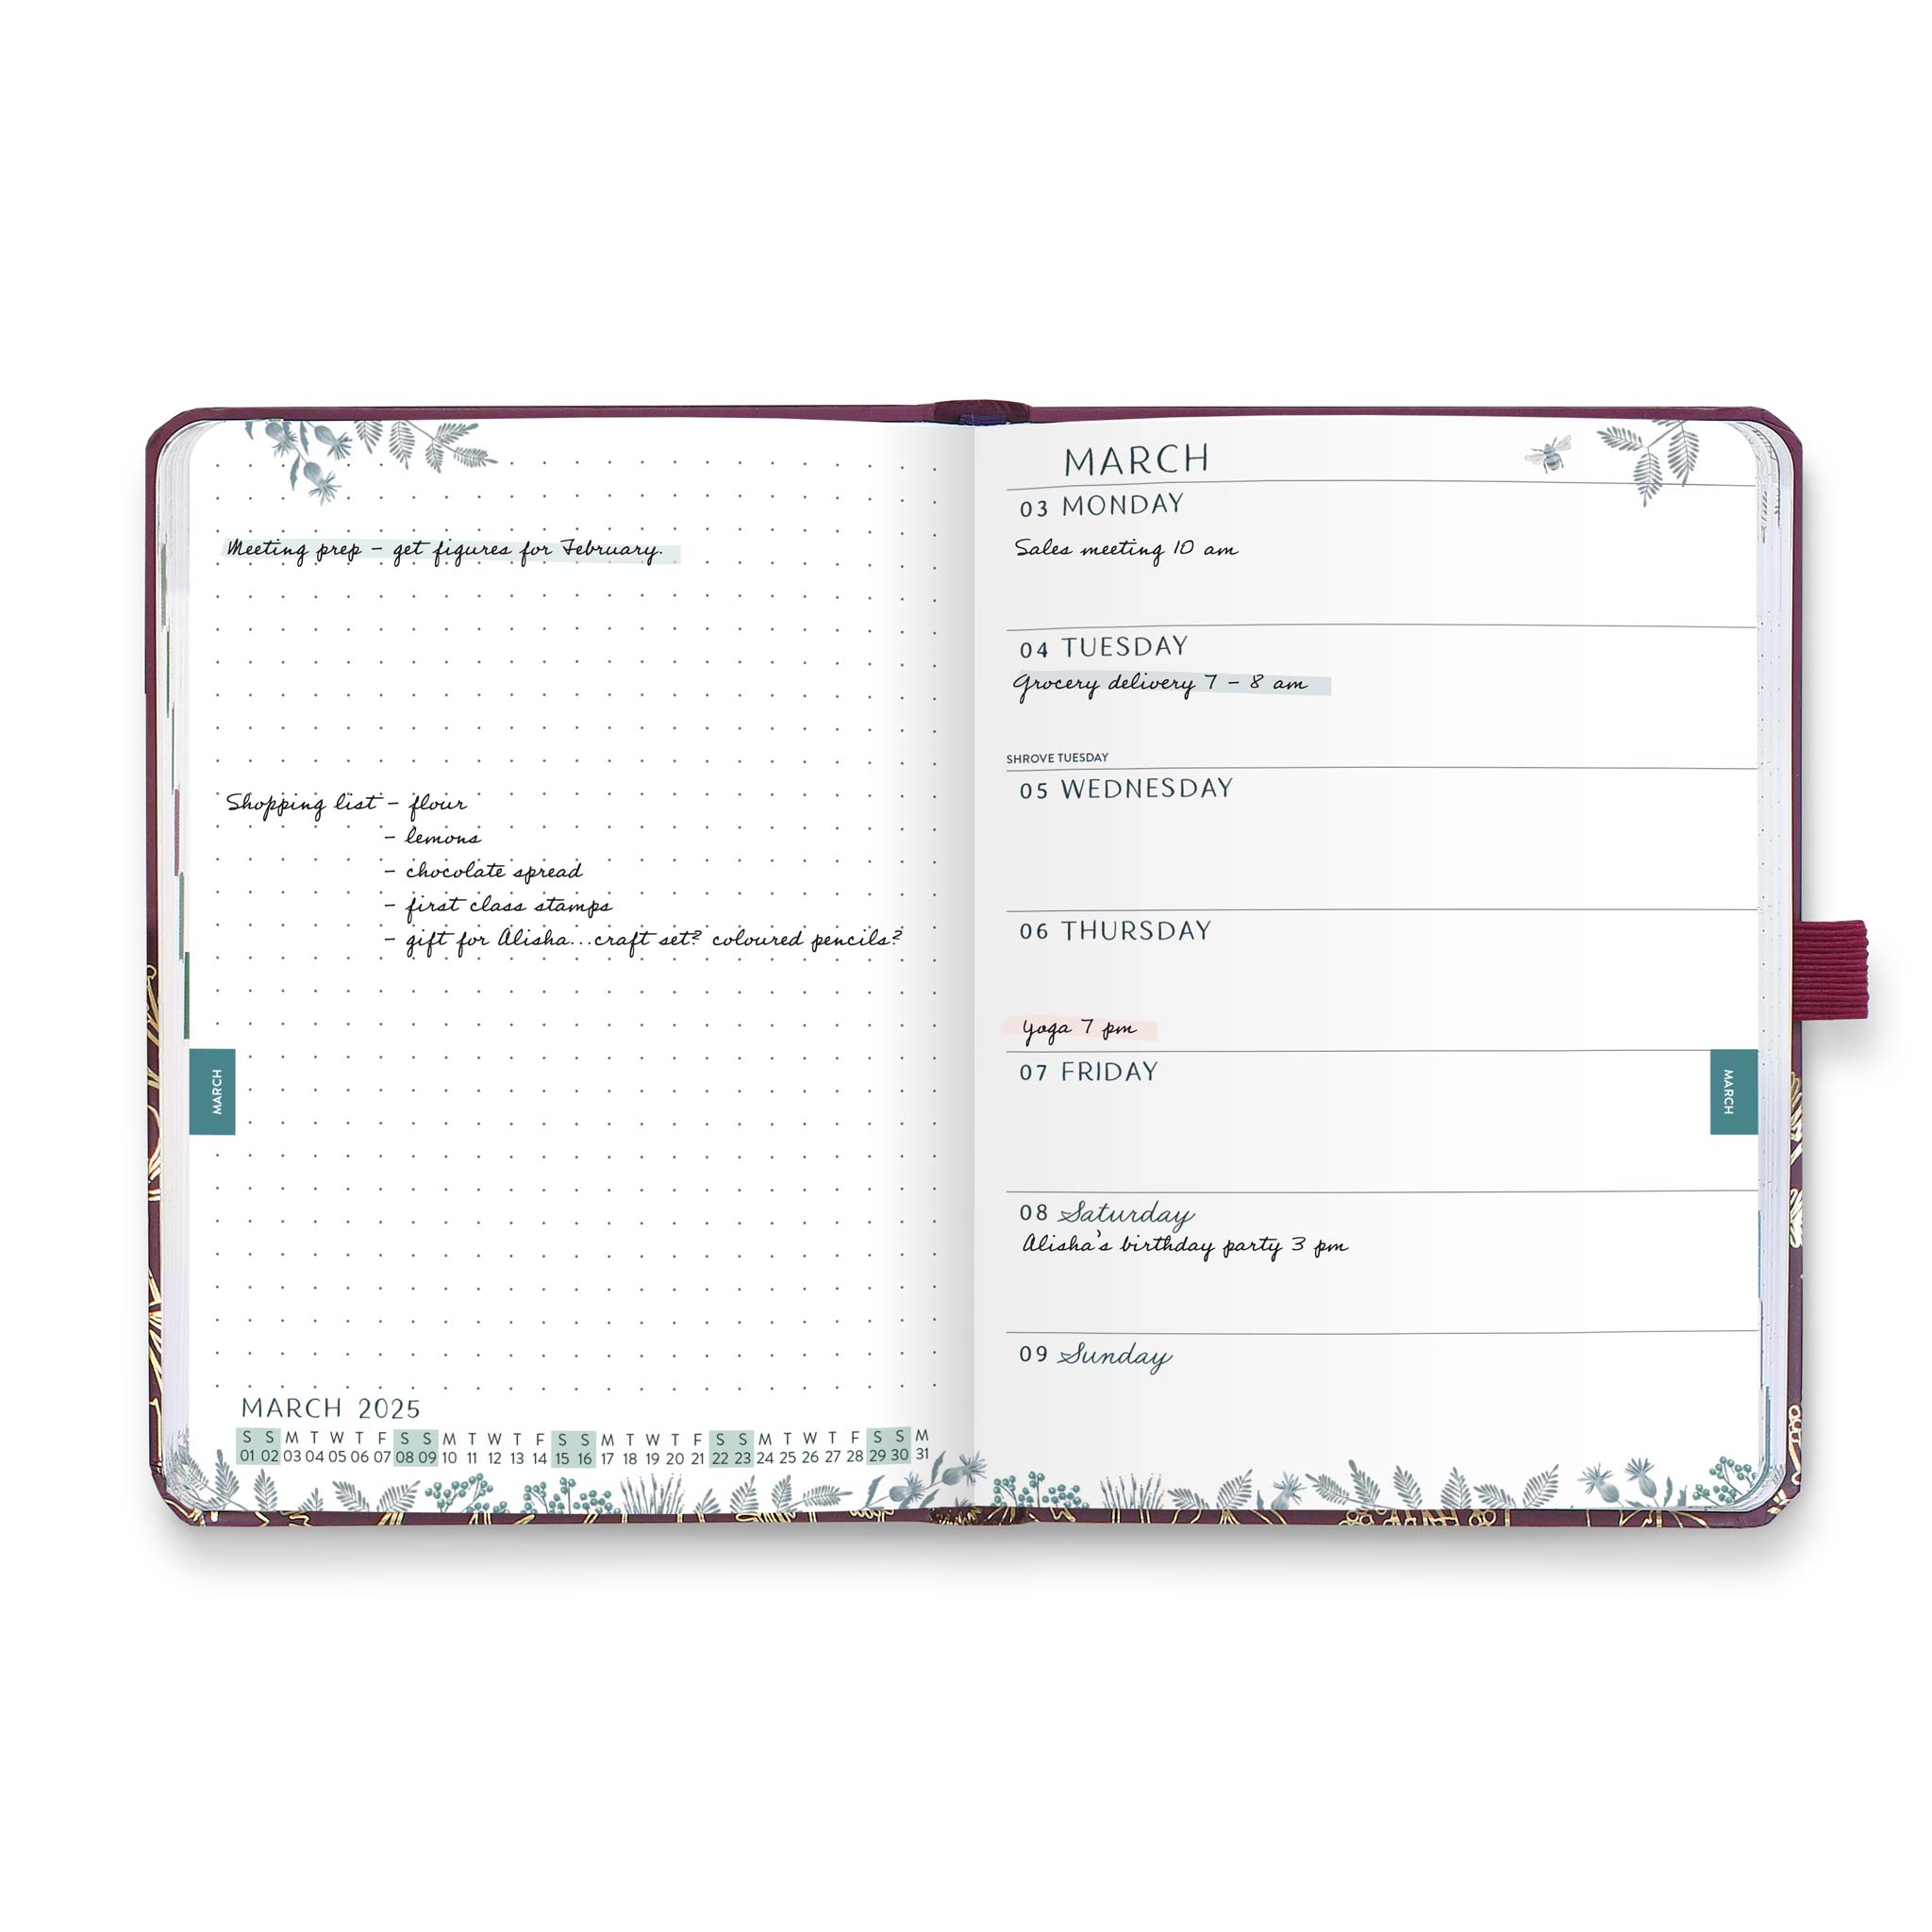 An inside diary spread showing weekly appointments on the right and notes on the left